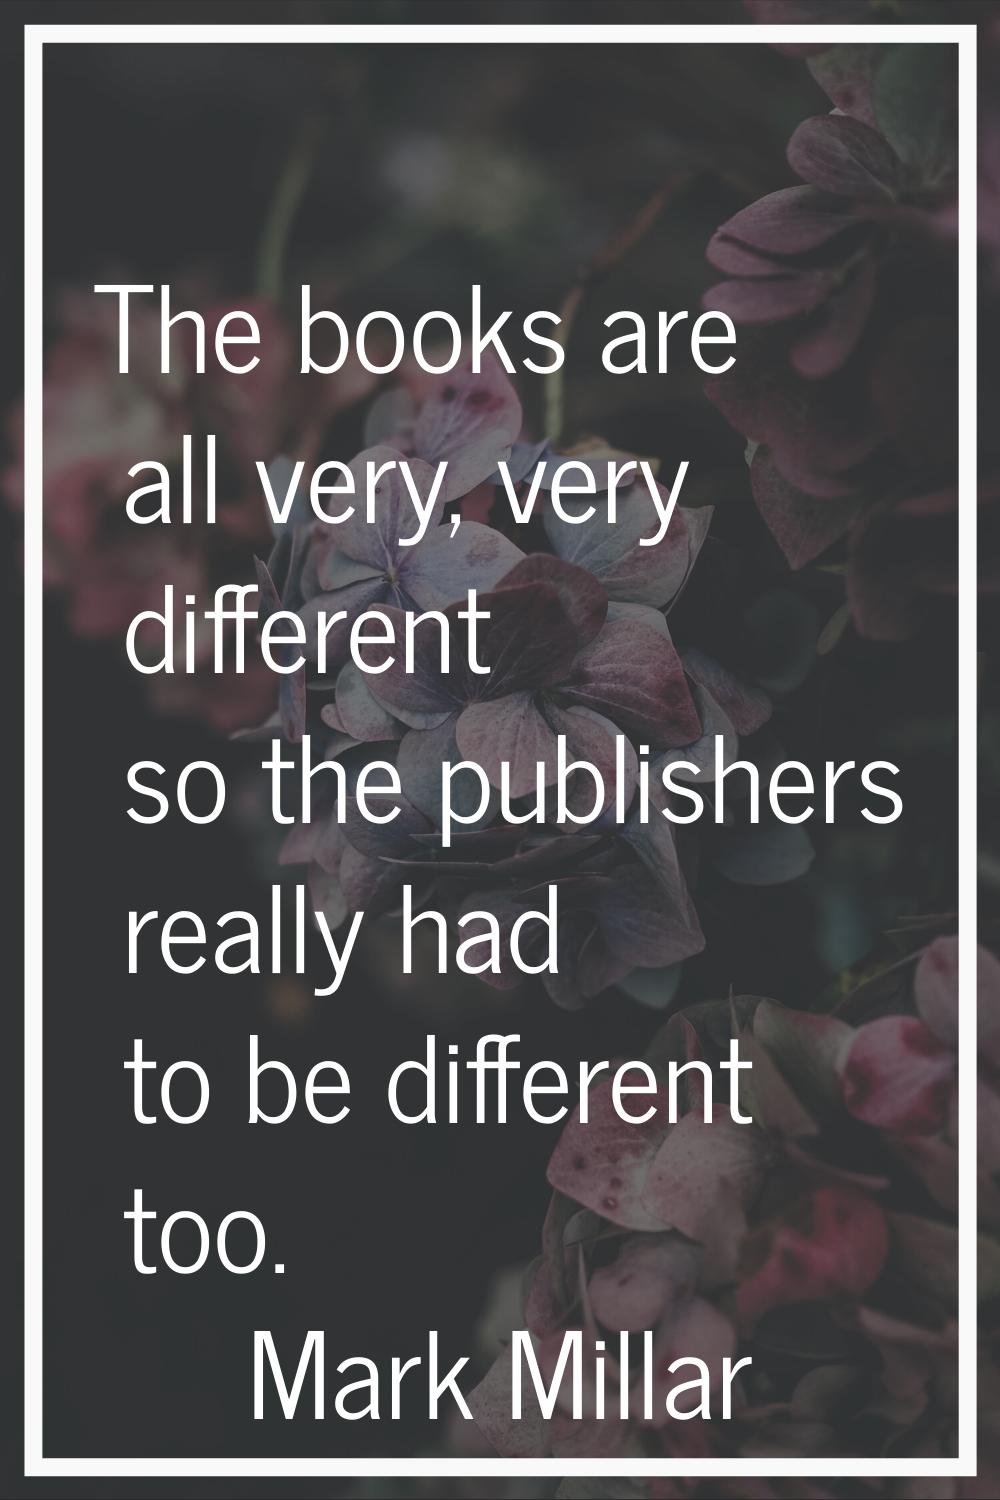 The books are all very, very different so the publishers really had to be different too.